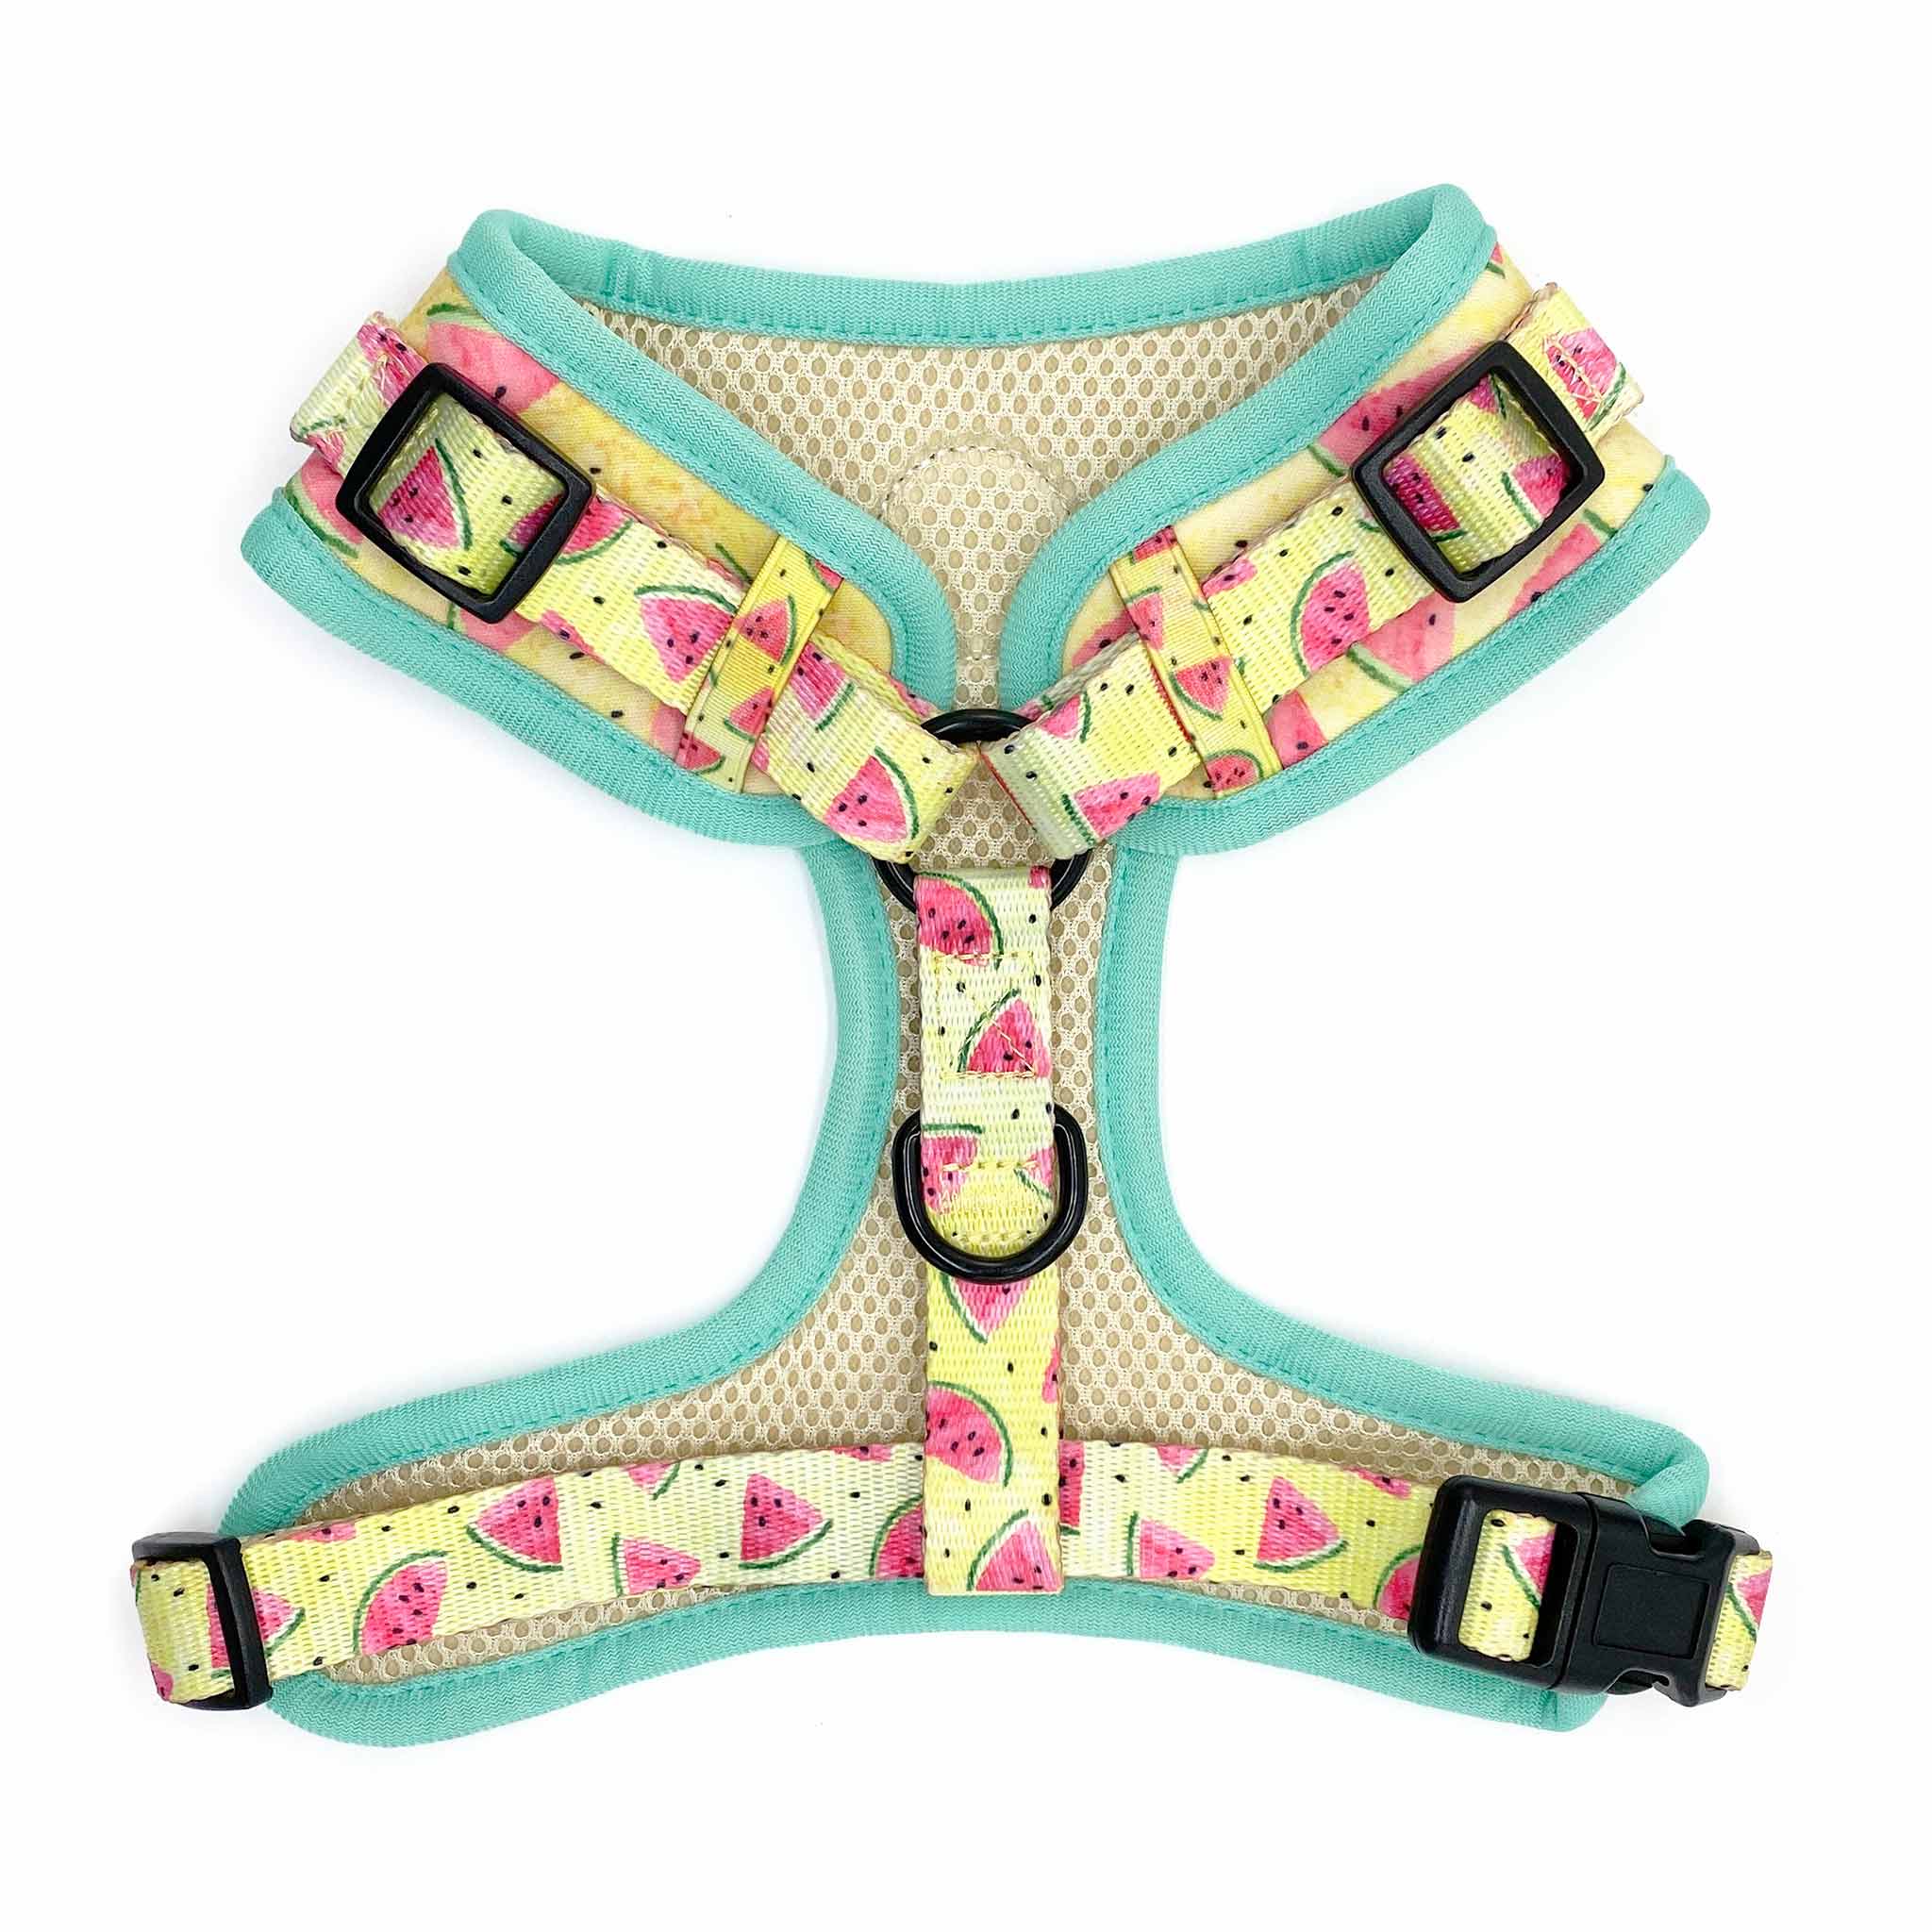 Back view of Pipco Pets adjustable dog harness with Summer Melons watermelon print pattern in yellow  Edit alt text